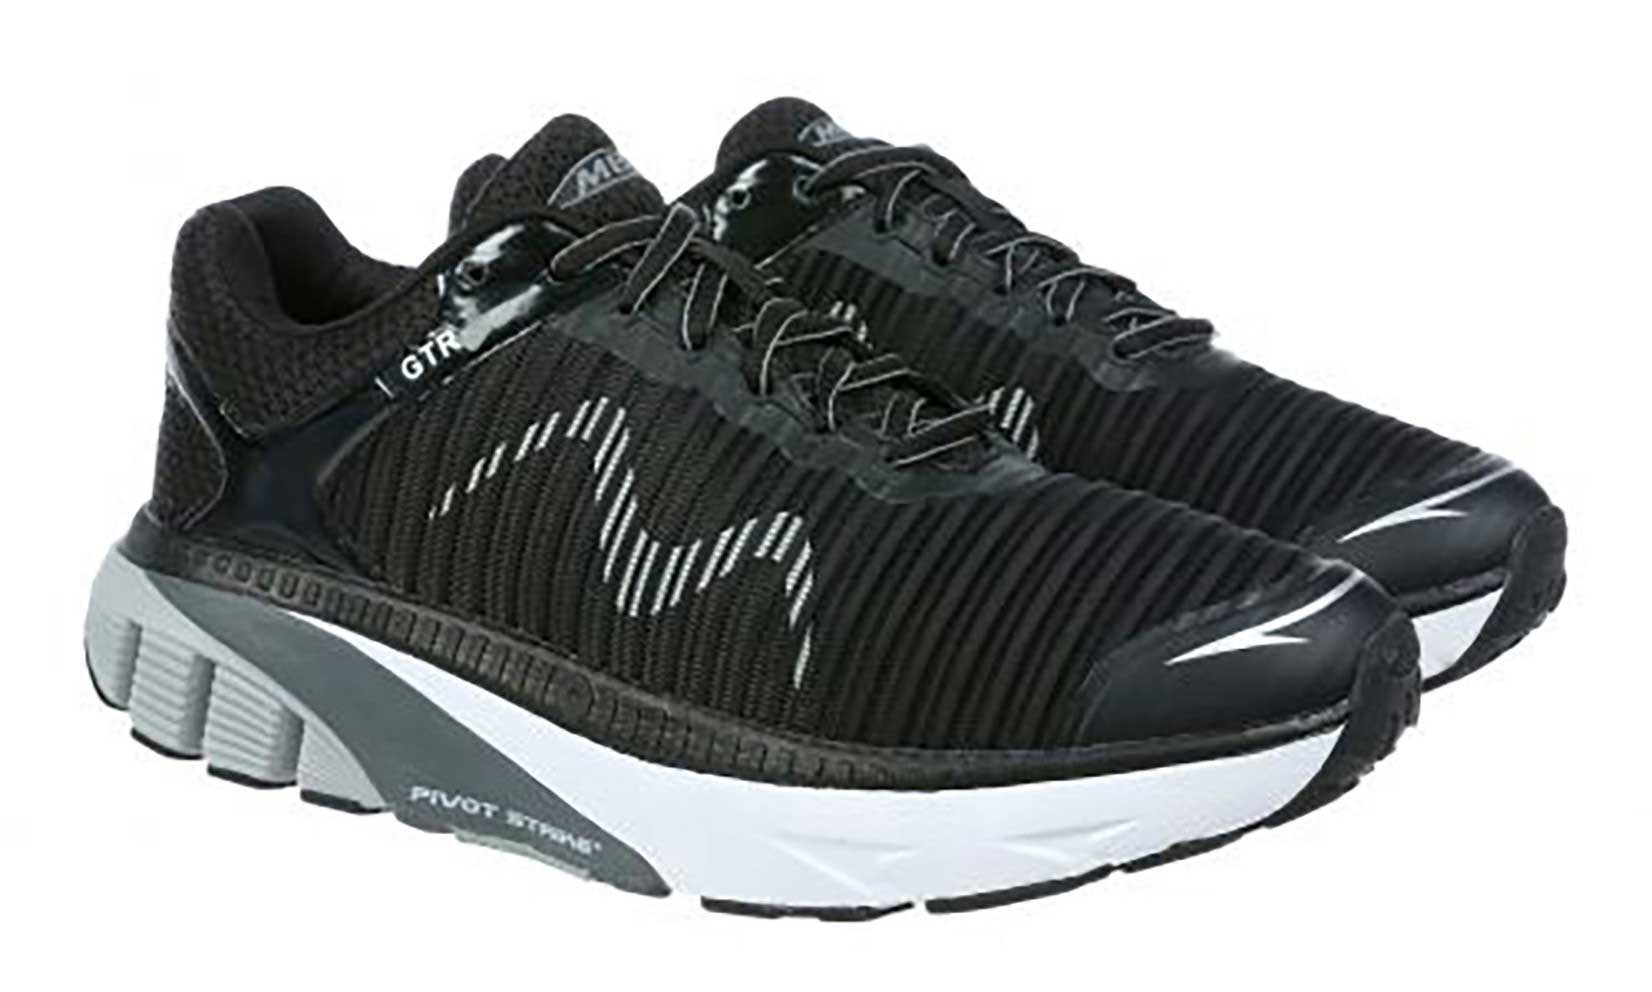 mbt running shoes